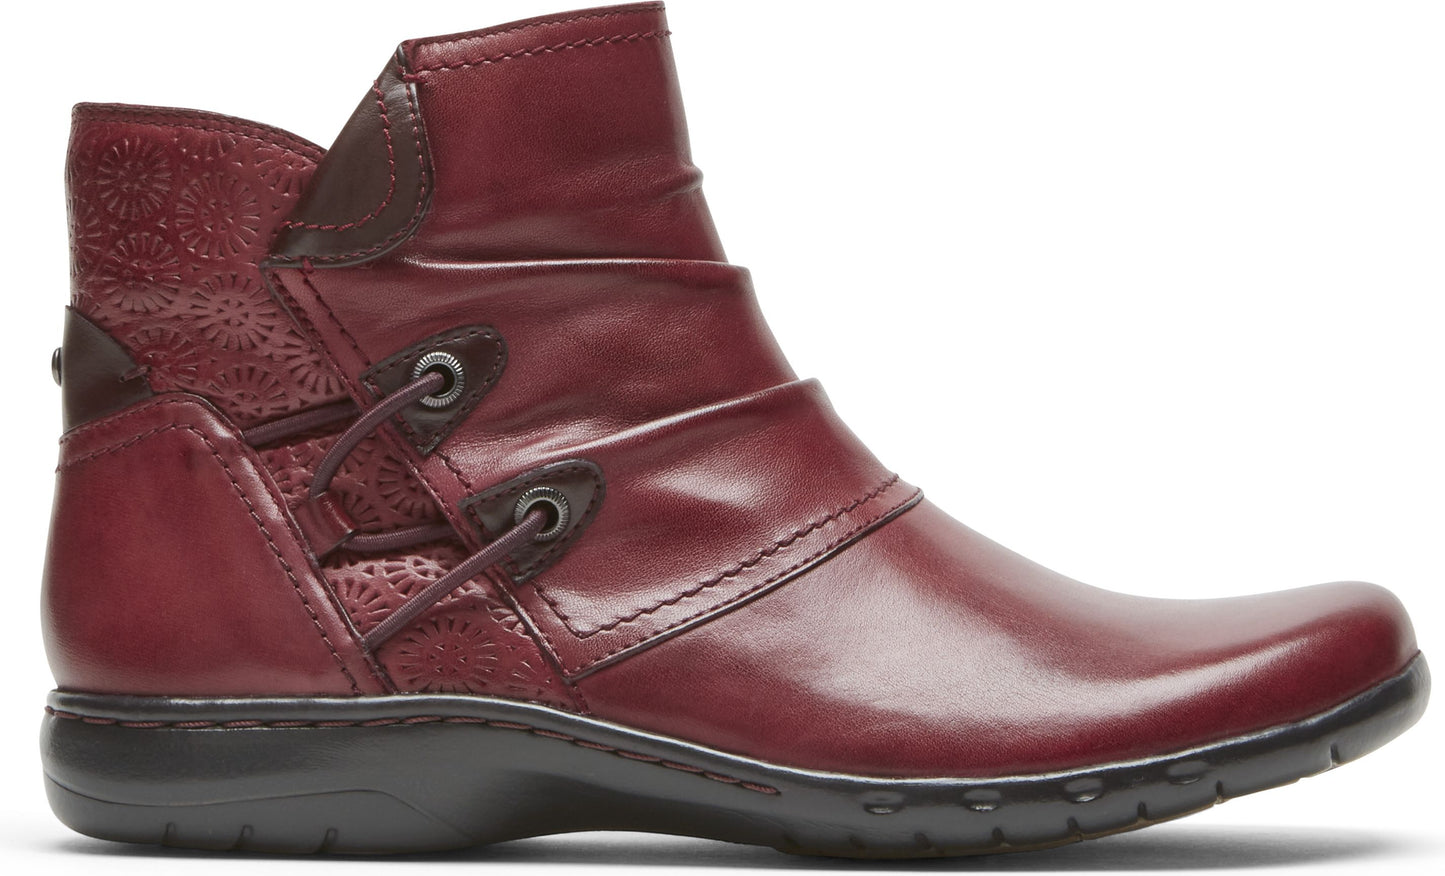 Cobb Hill Boots Penfield Ruch Boot Red - Wide